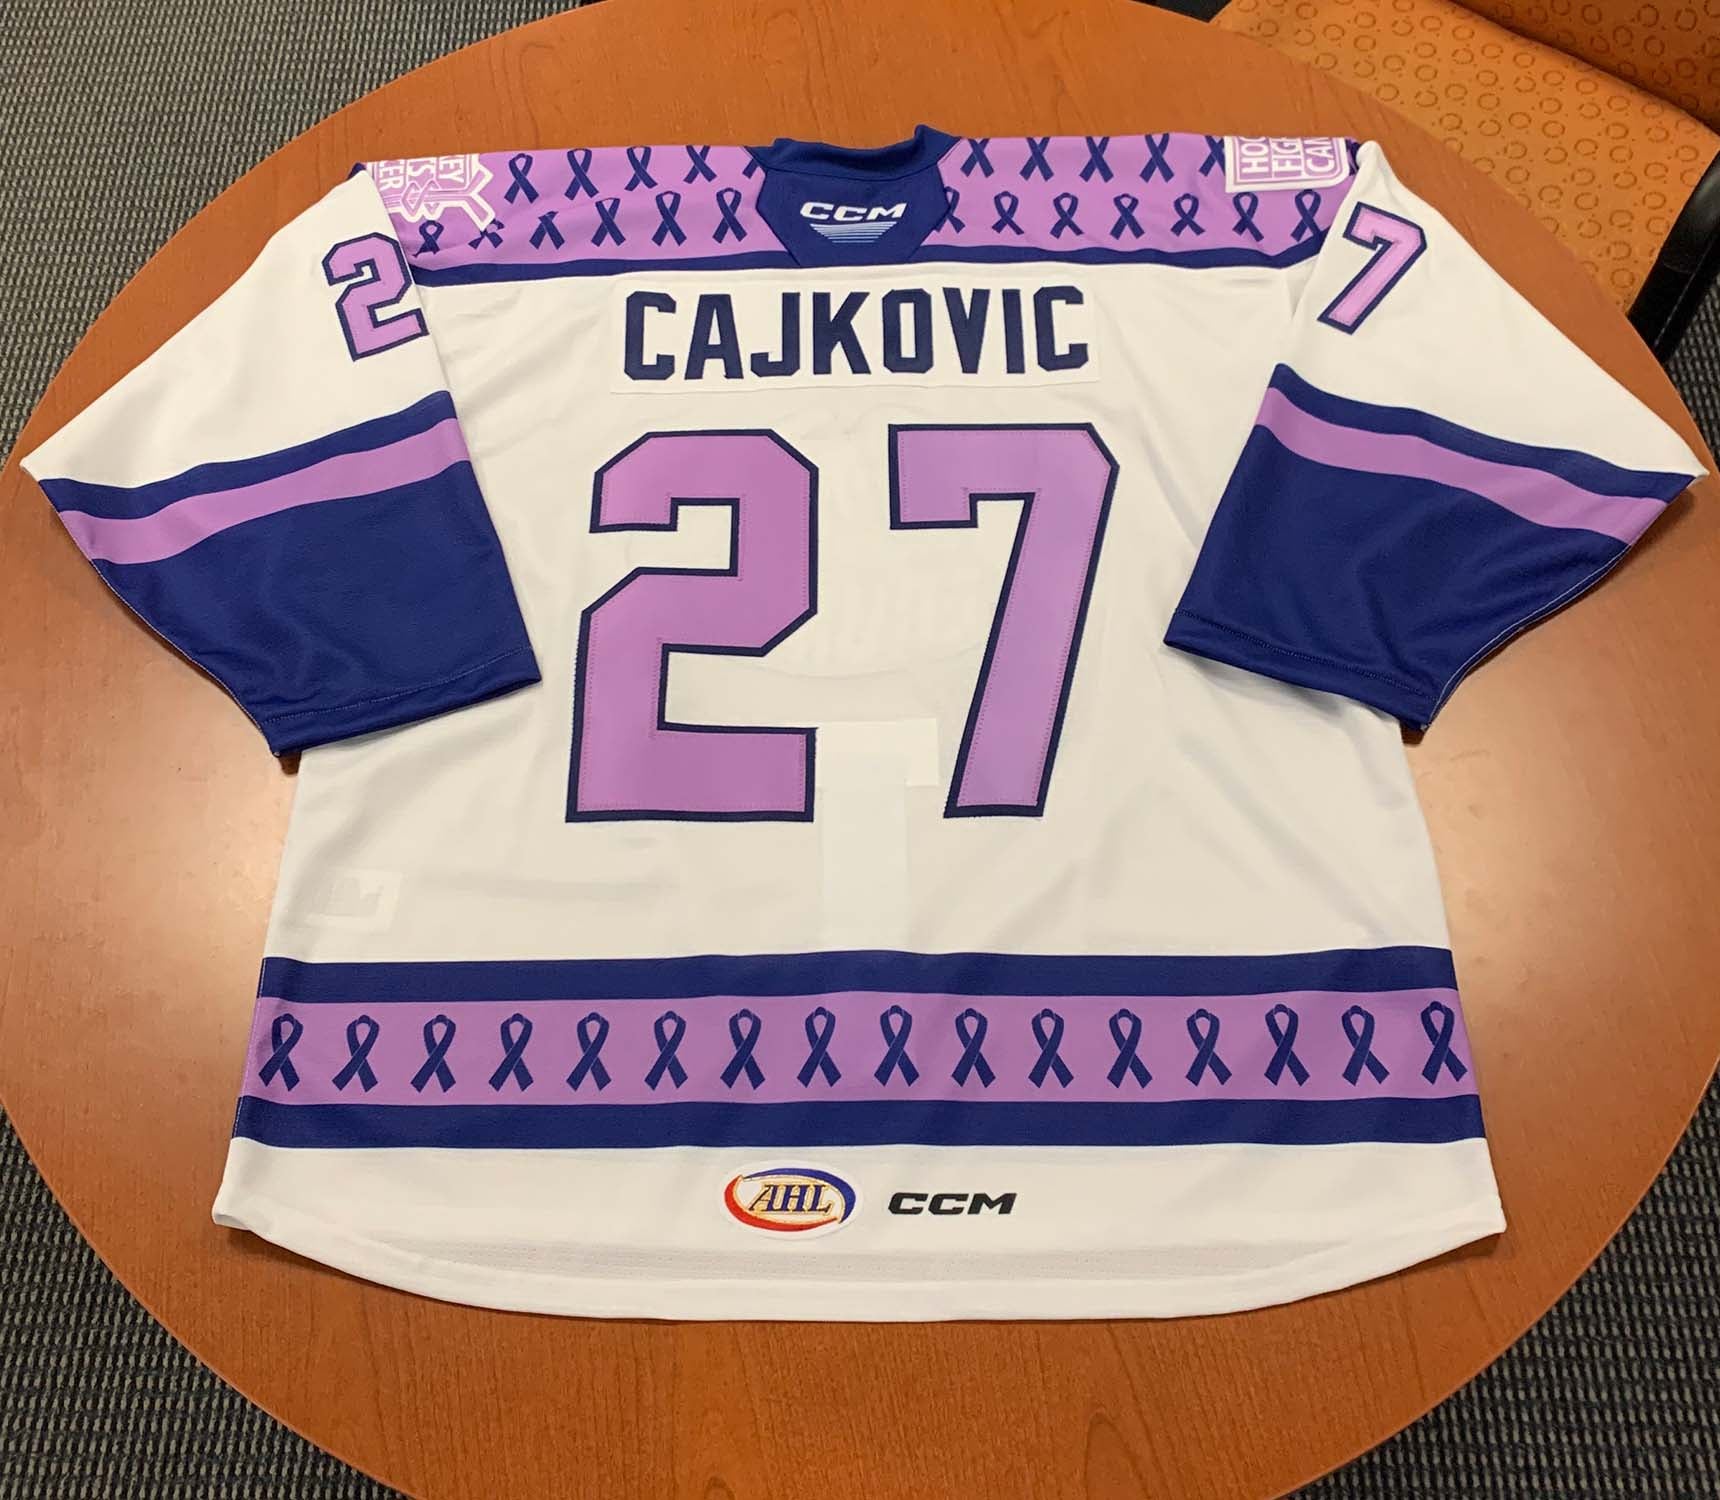 Hockey Fights Cancer Rangers Jersey